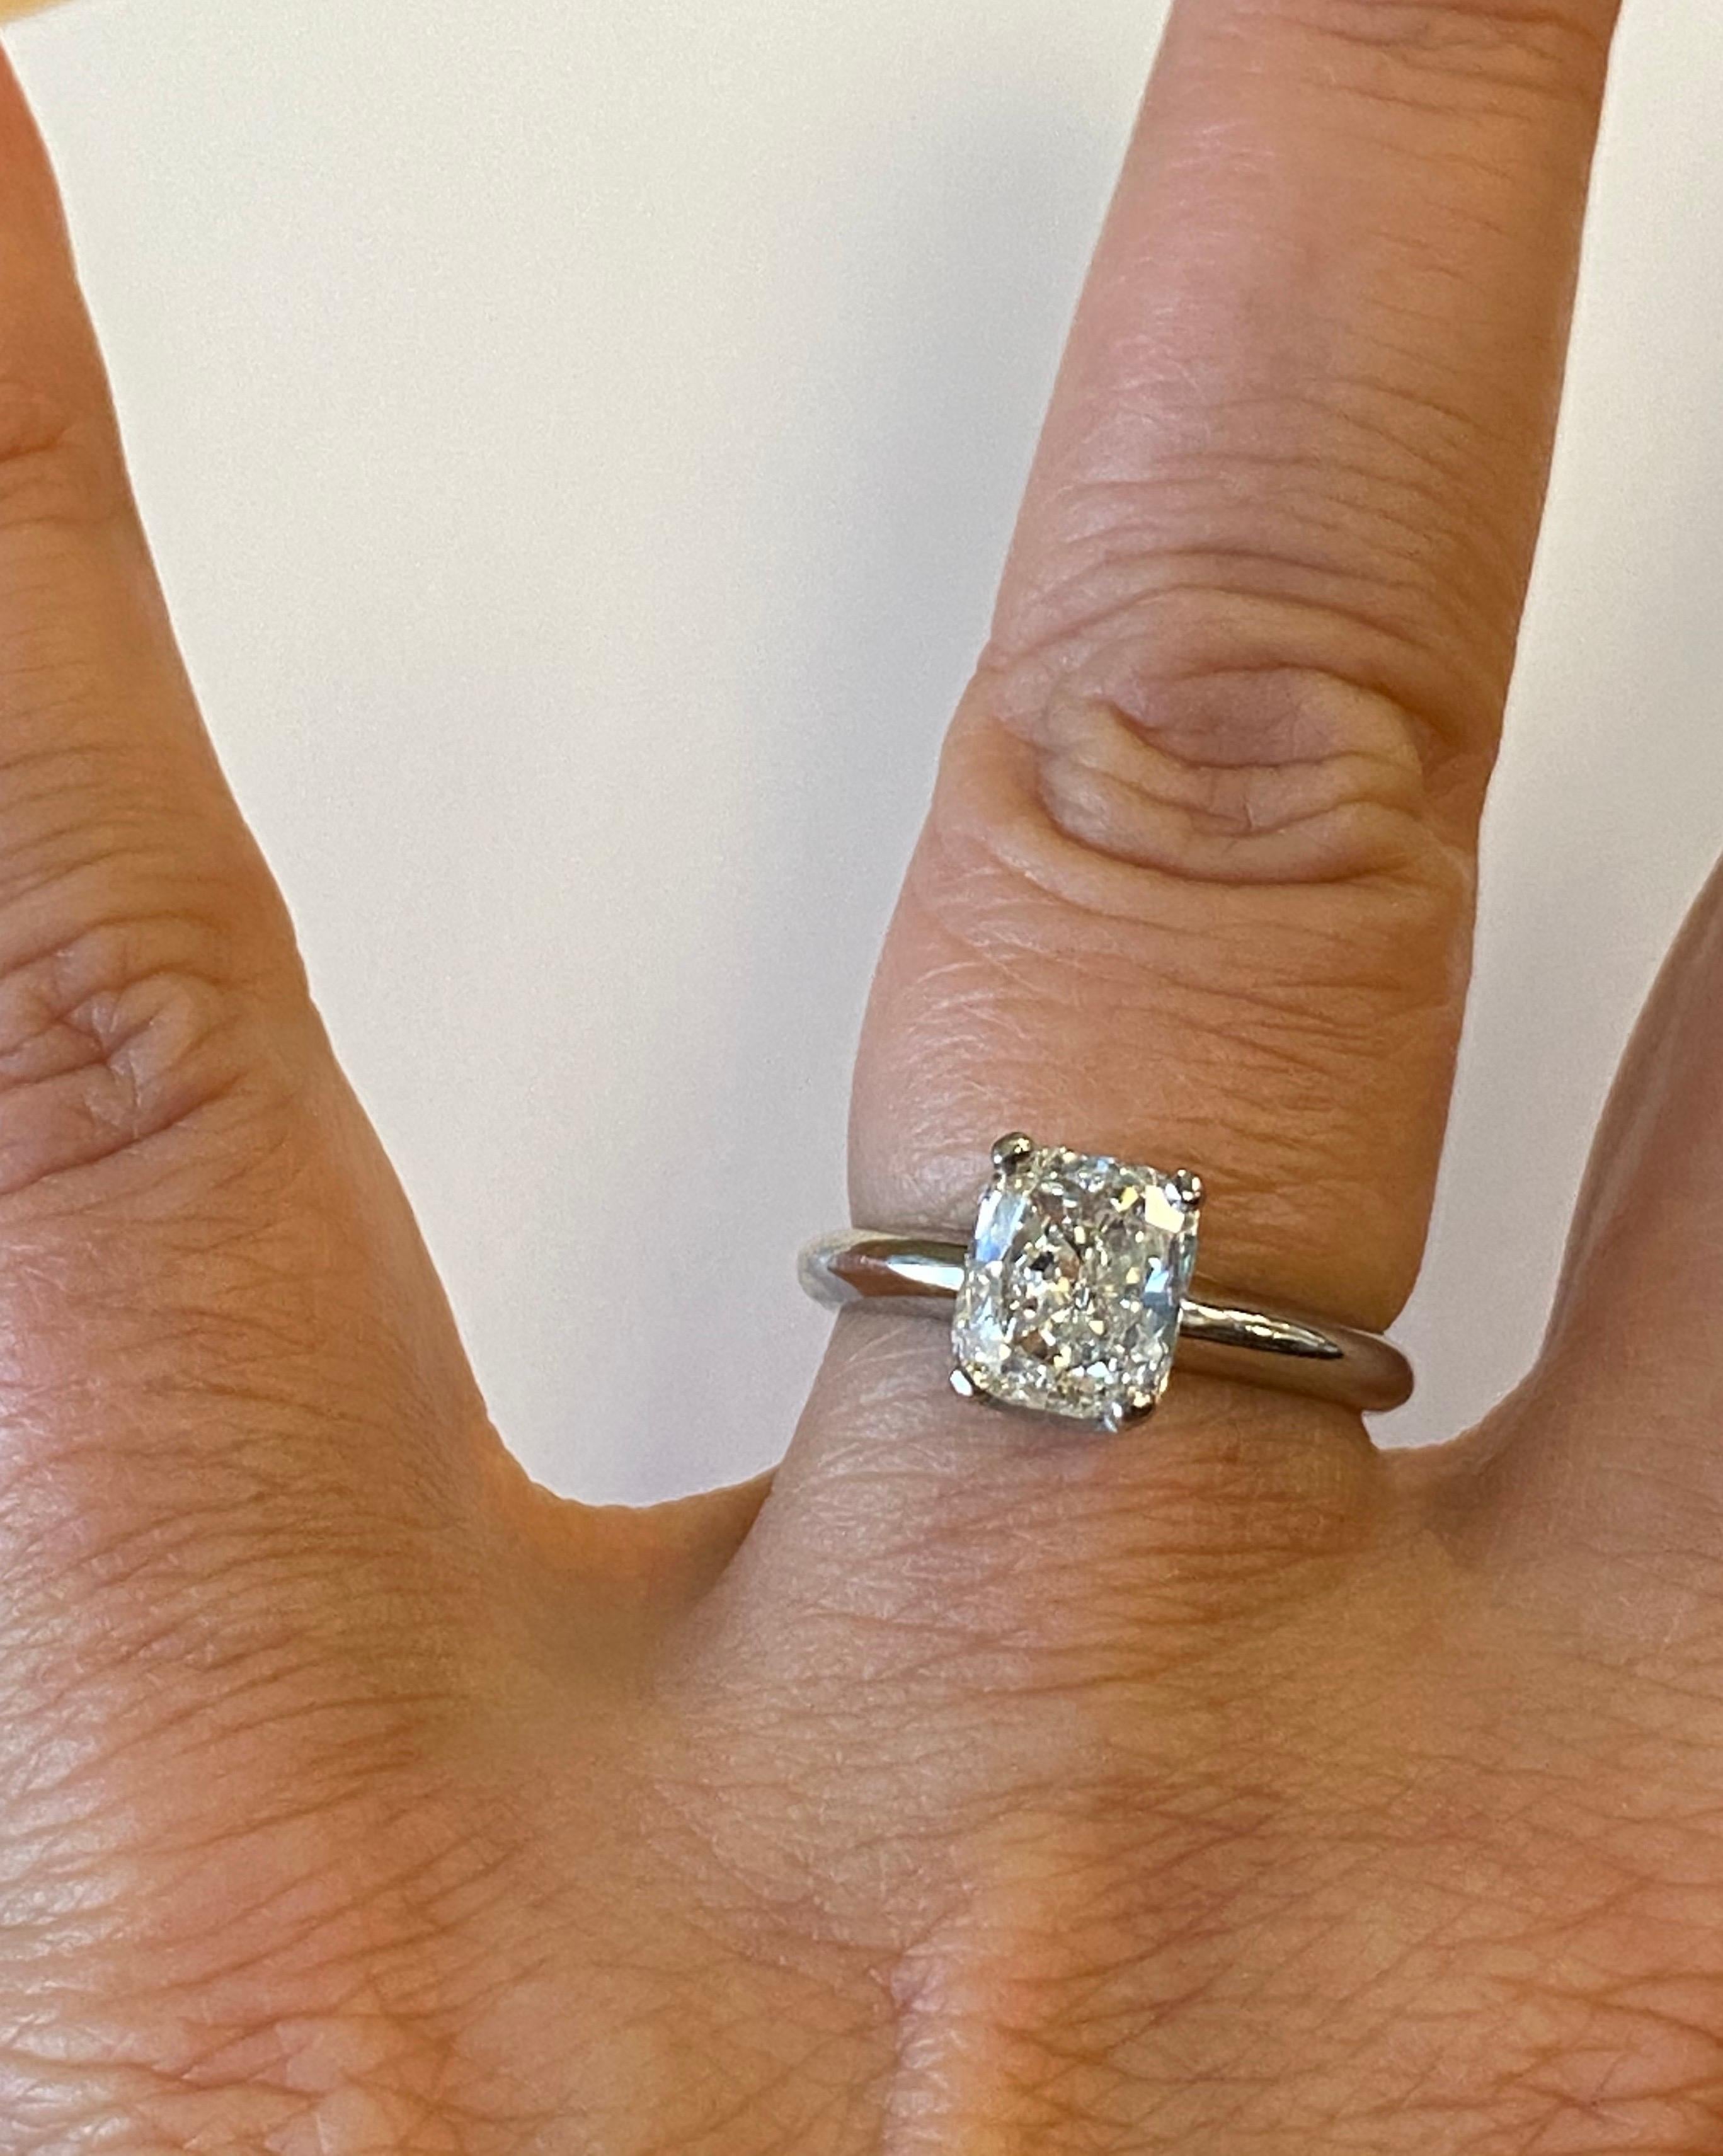 Platinum four prong engagement ring, prong set in center with GIA certified Cushion shape diamond, weighing 1.52cts, I color, VS2 clarity.
Finger size 6, may be sized.
Retails for $12,500